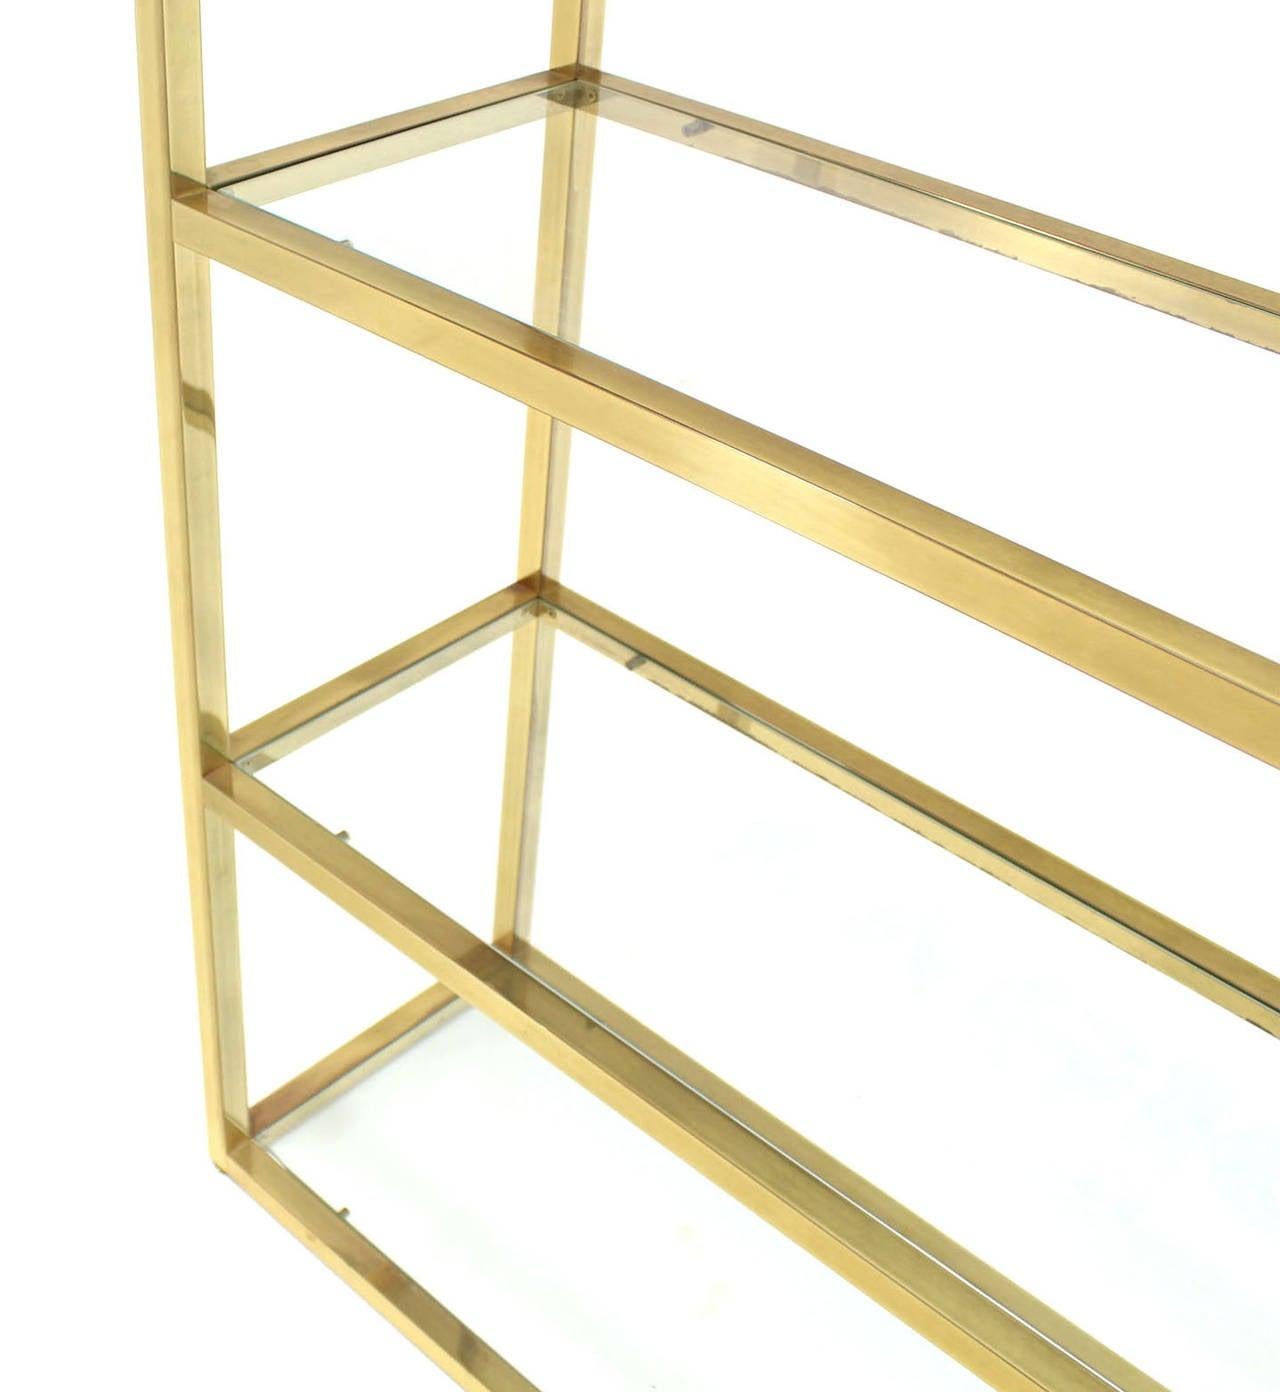 American Solid Square Brass Tube Five Glass Shelves Etagere Display Fixture Vitrine For Sale